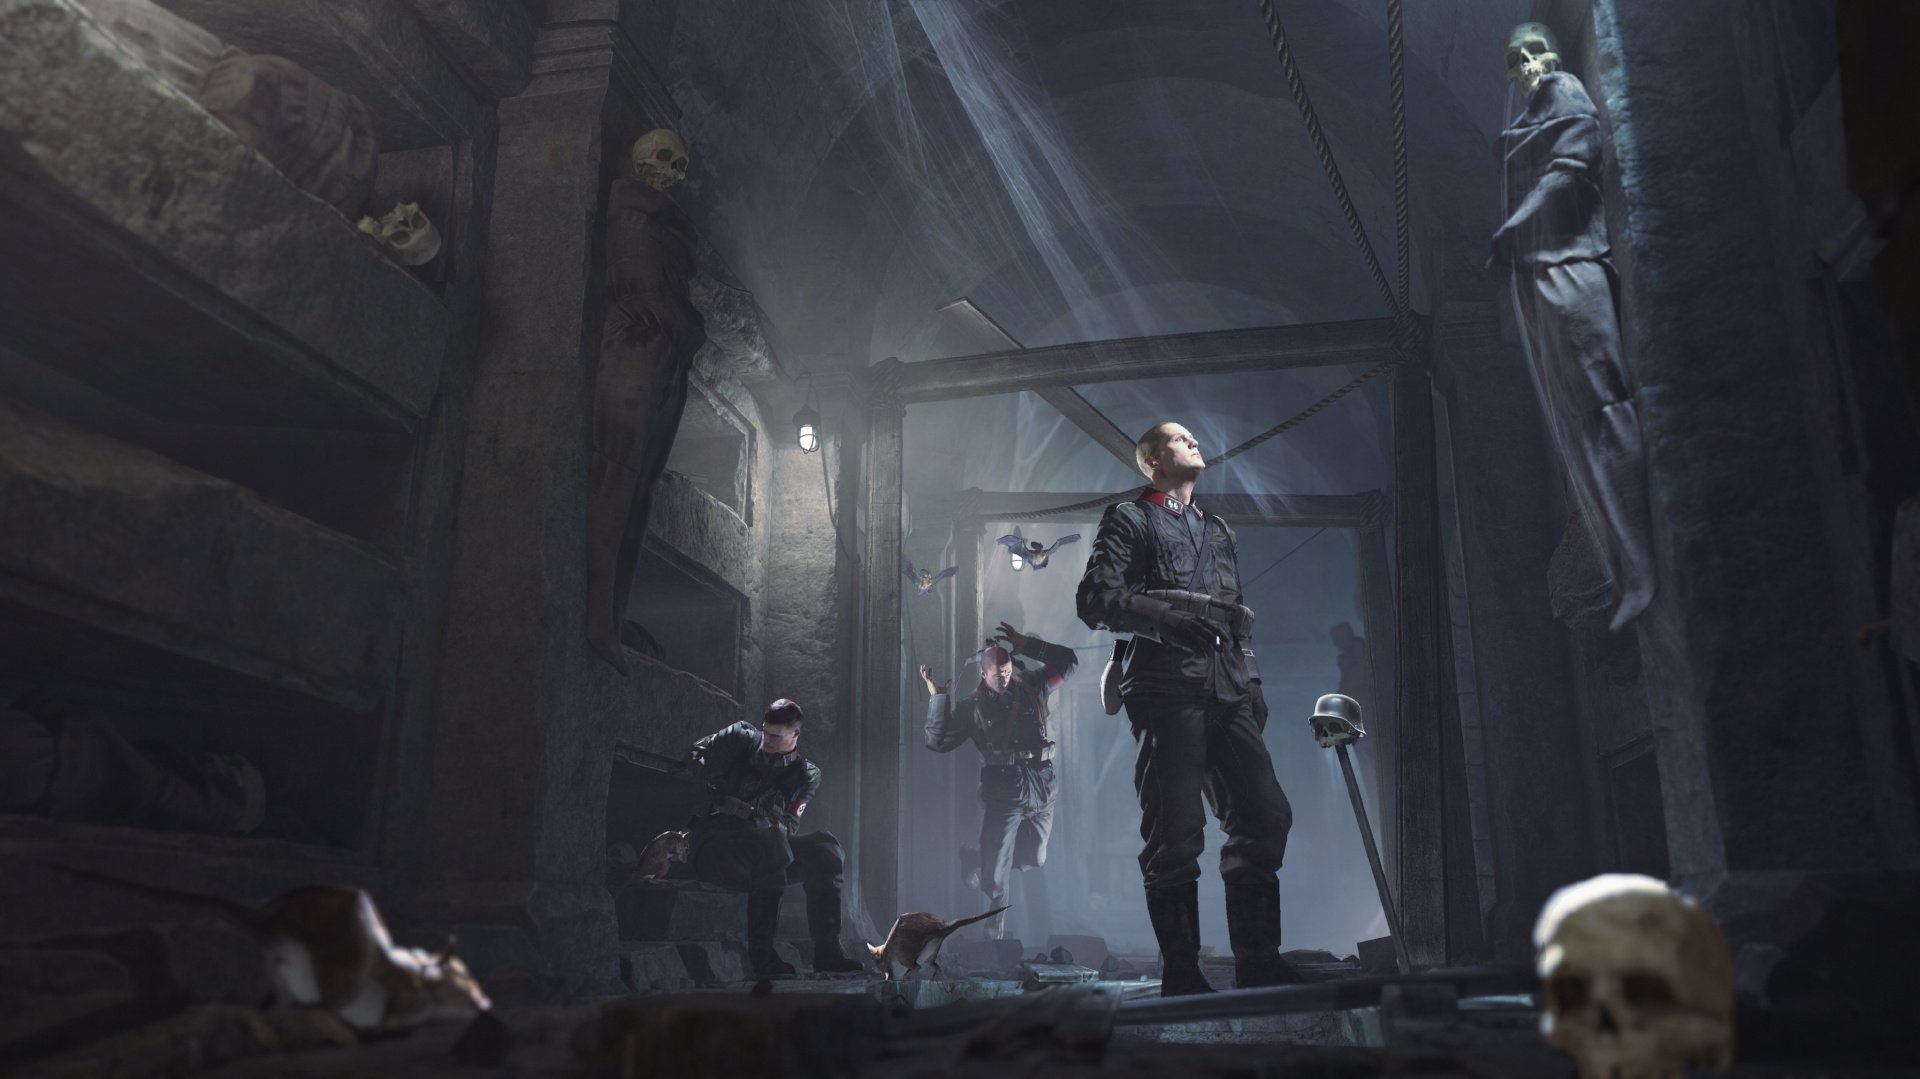 Review: Wolfenstein: The Old Blood